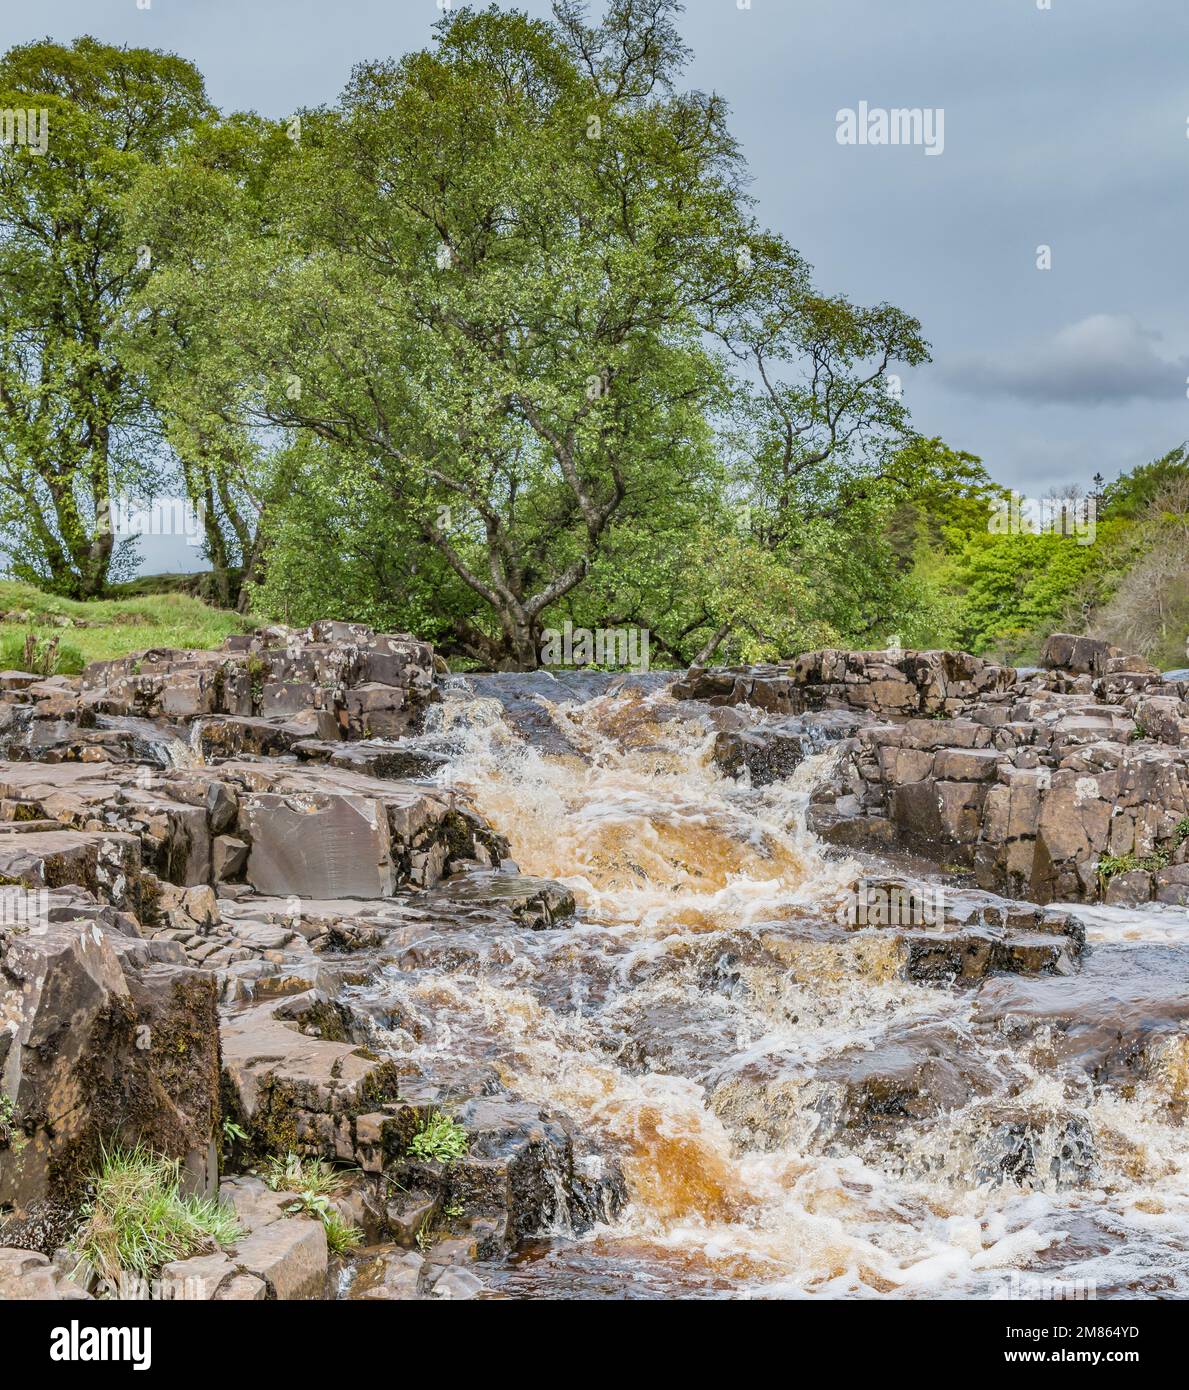 A cascade on the River Tees just above Low Force waterfall sparkling in spring sunshine. Taken from the Pennine Way long distance footopath. Stock Photo